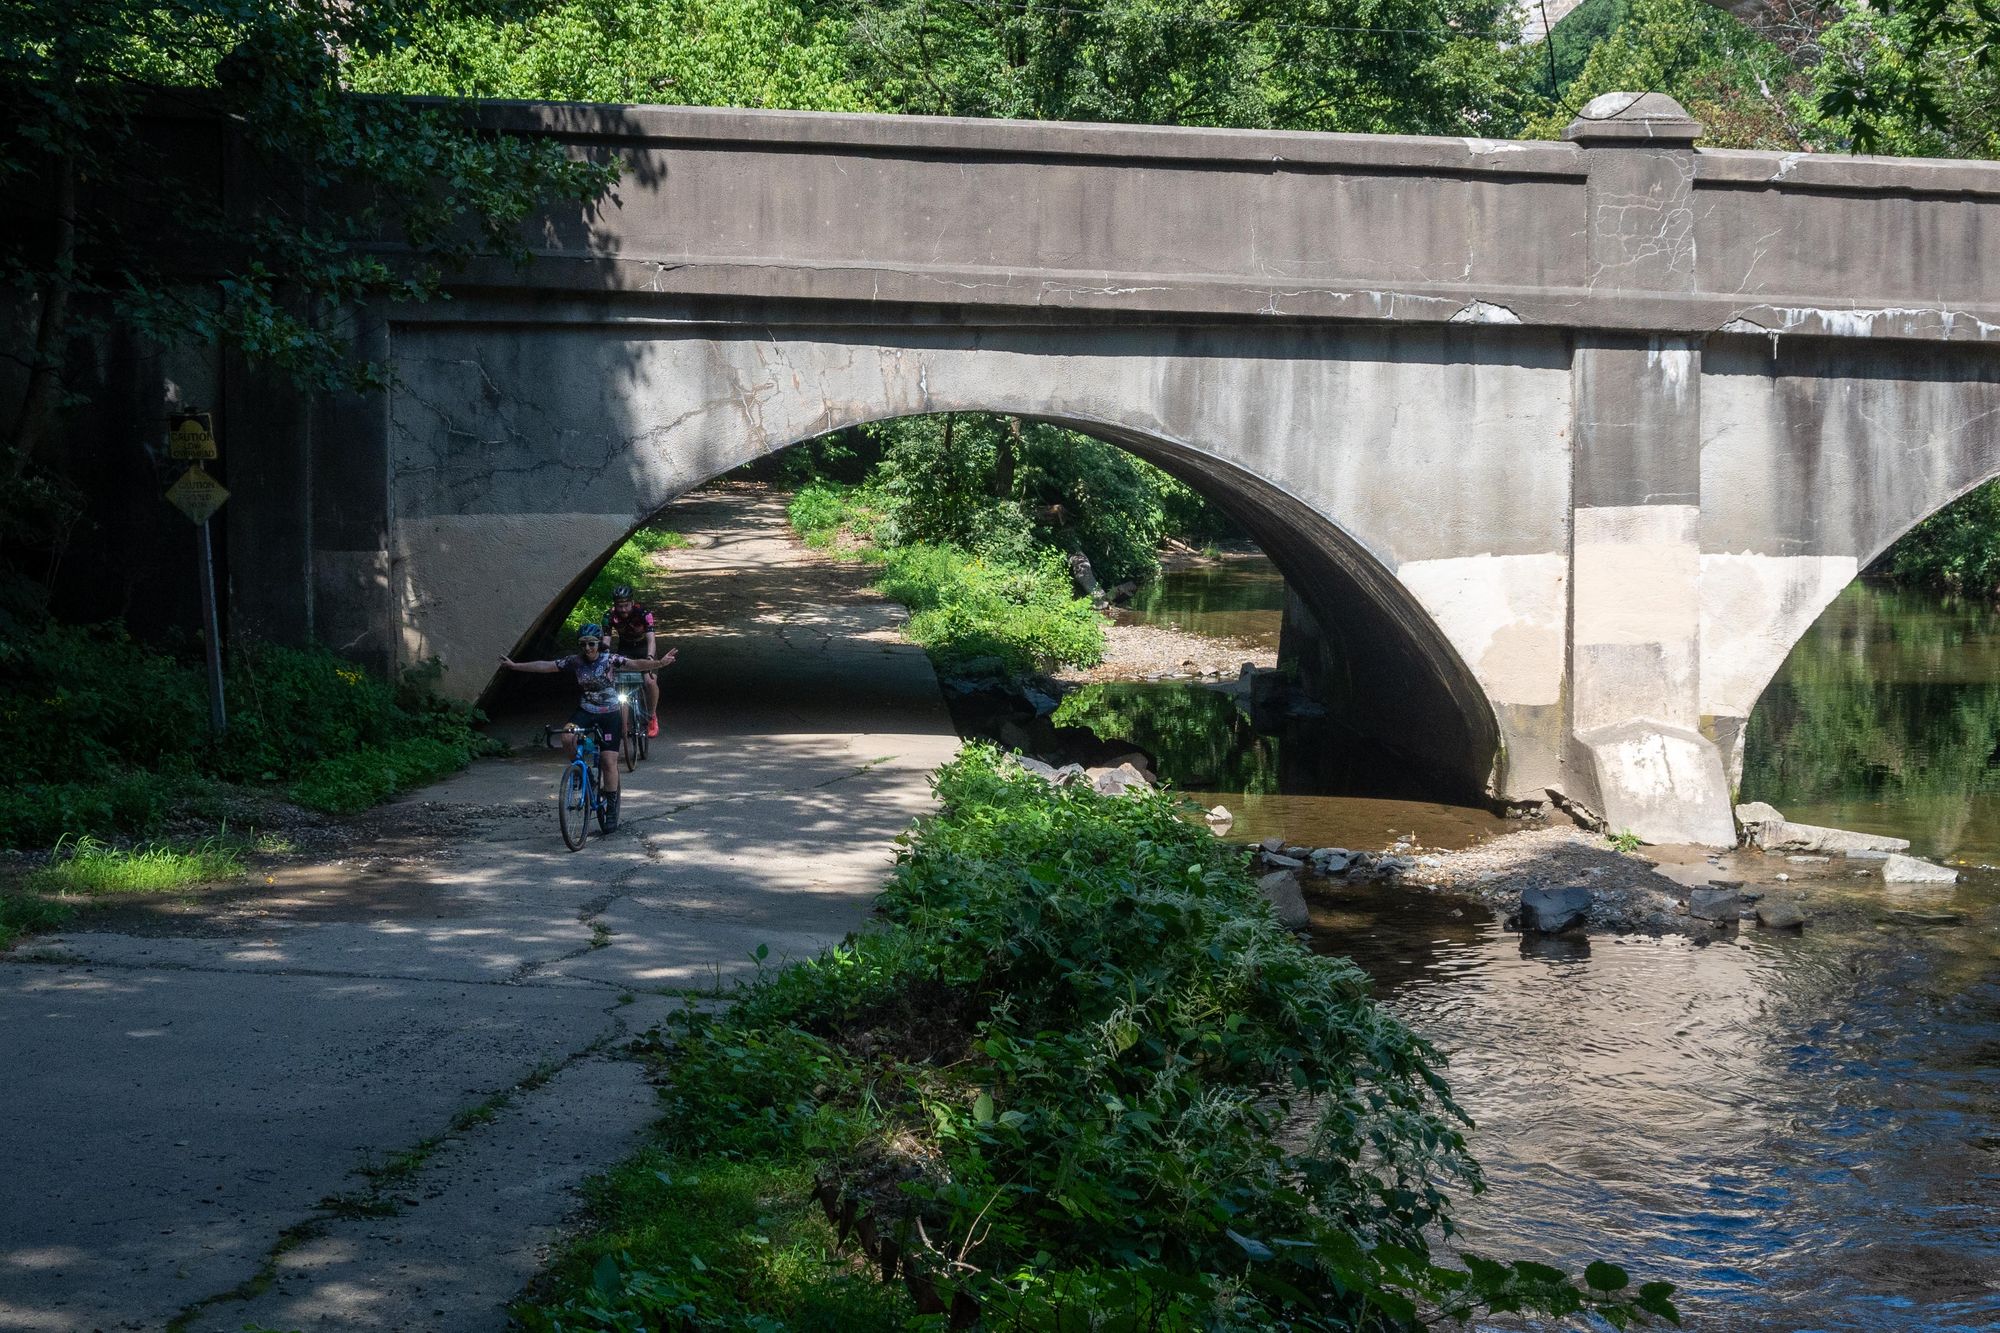 The Pennypack - Wissahickon Connection